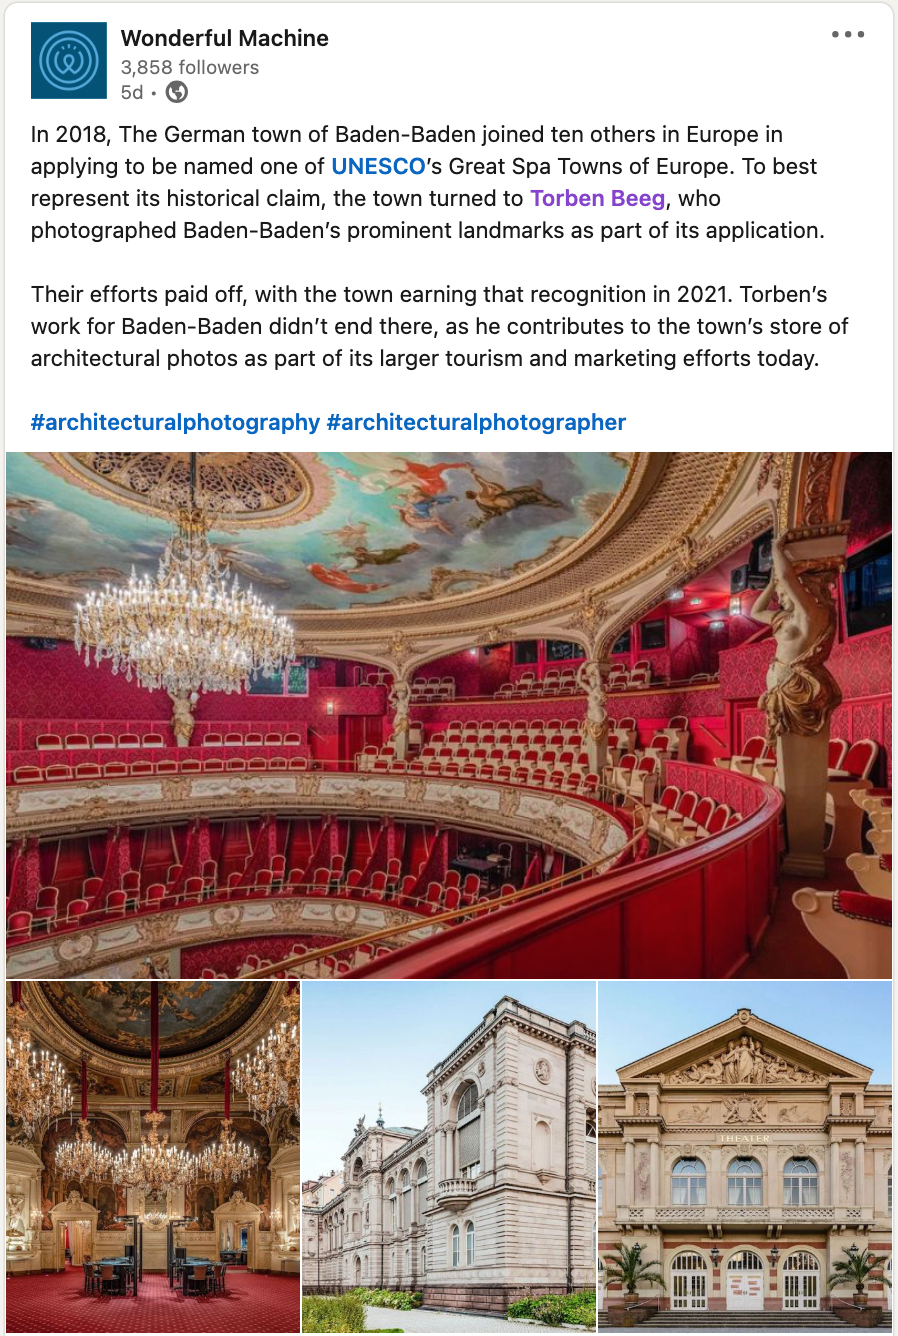 Screenshot of a LinkedIn post featuring Torben Beeg's architectural photography in Baden-Baden for UNESCO's Great Spa Towns of Europe application. 